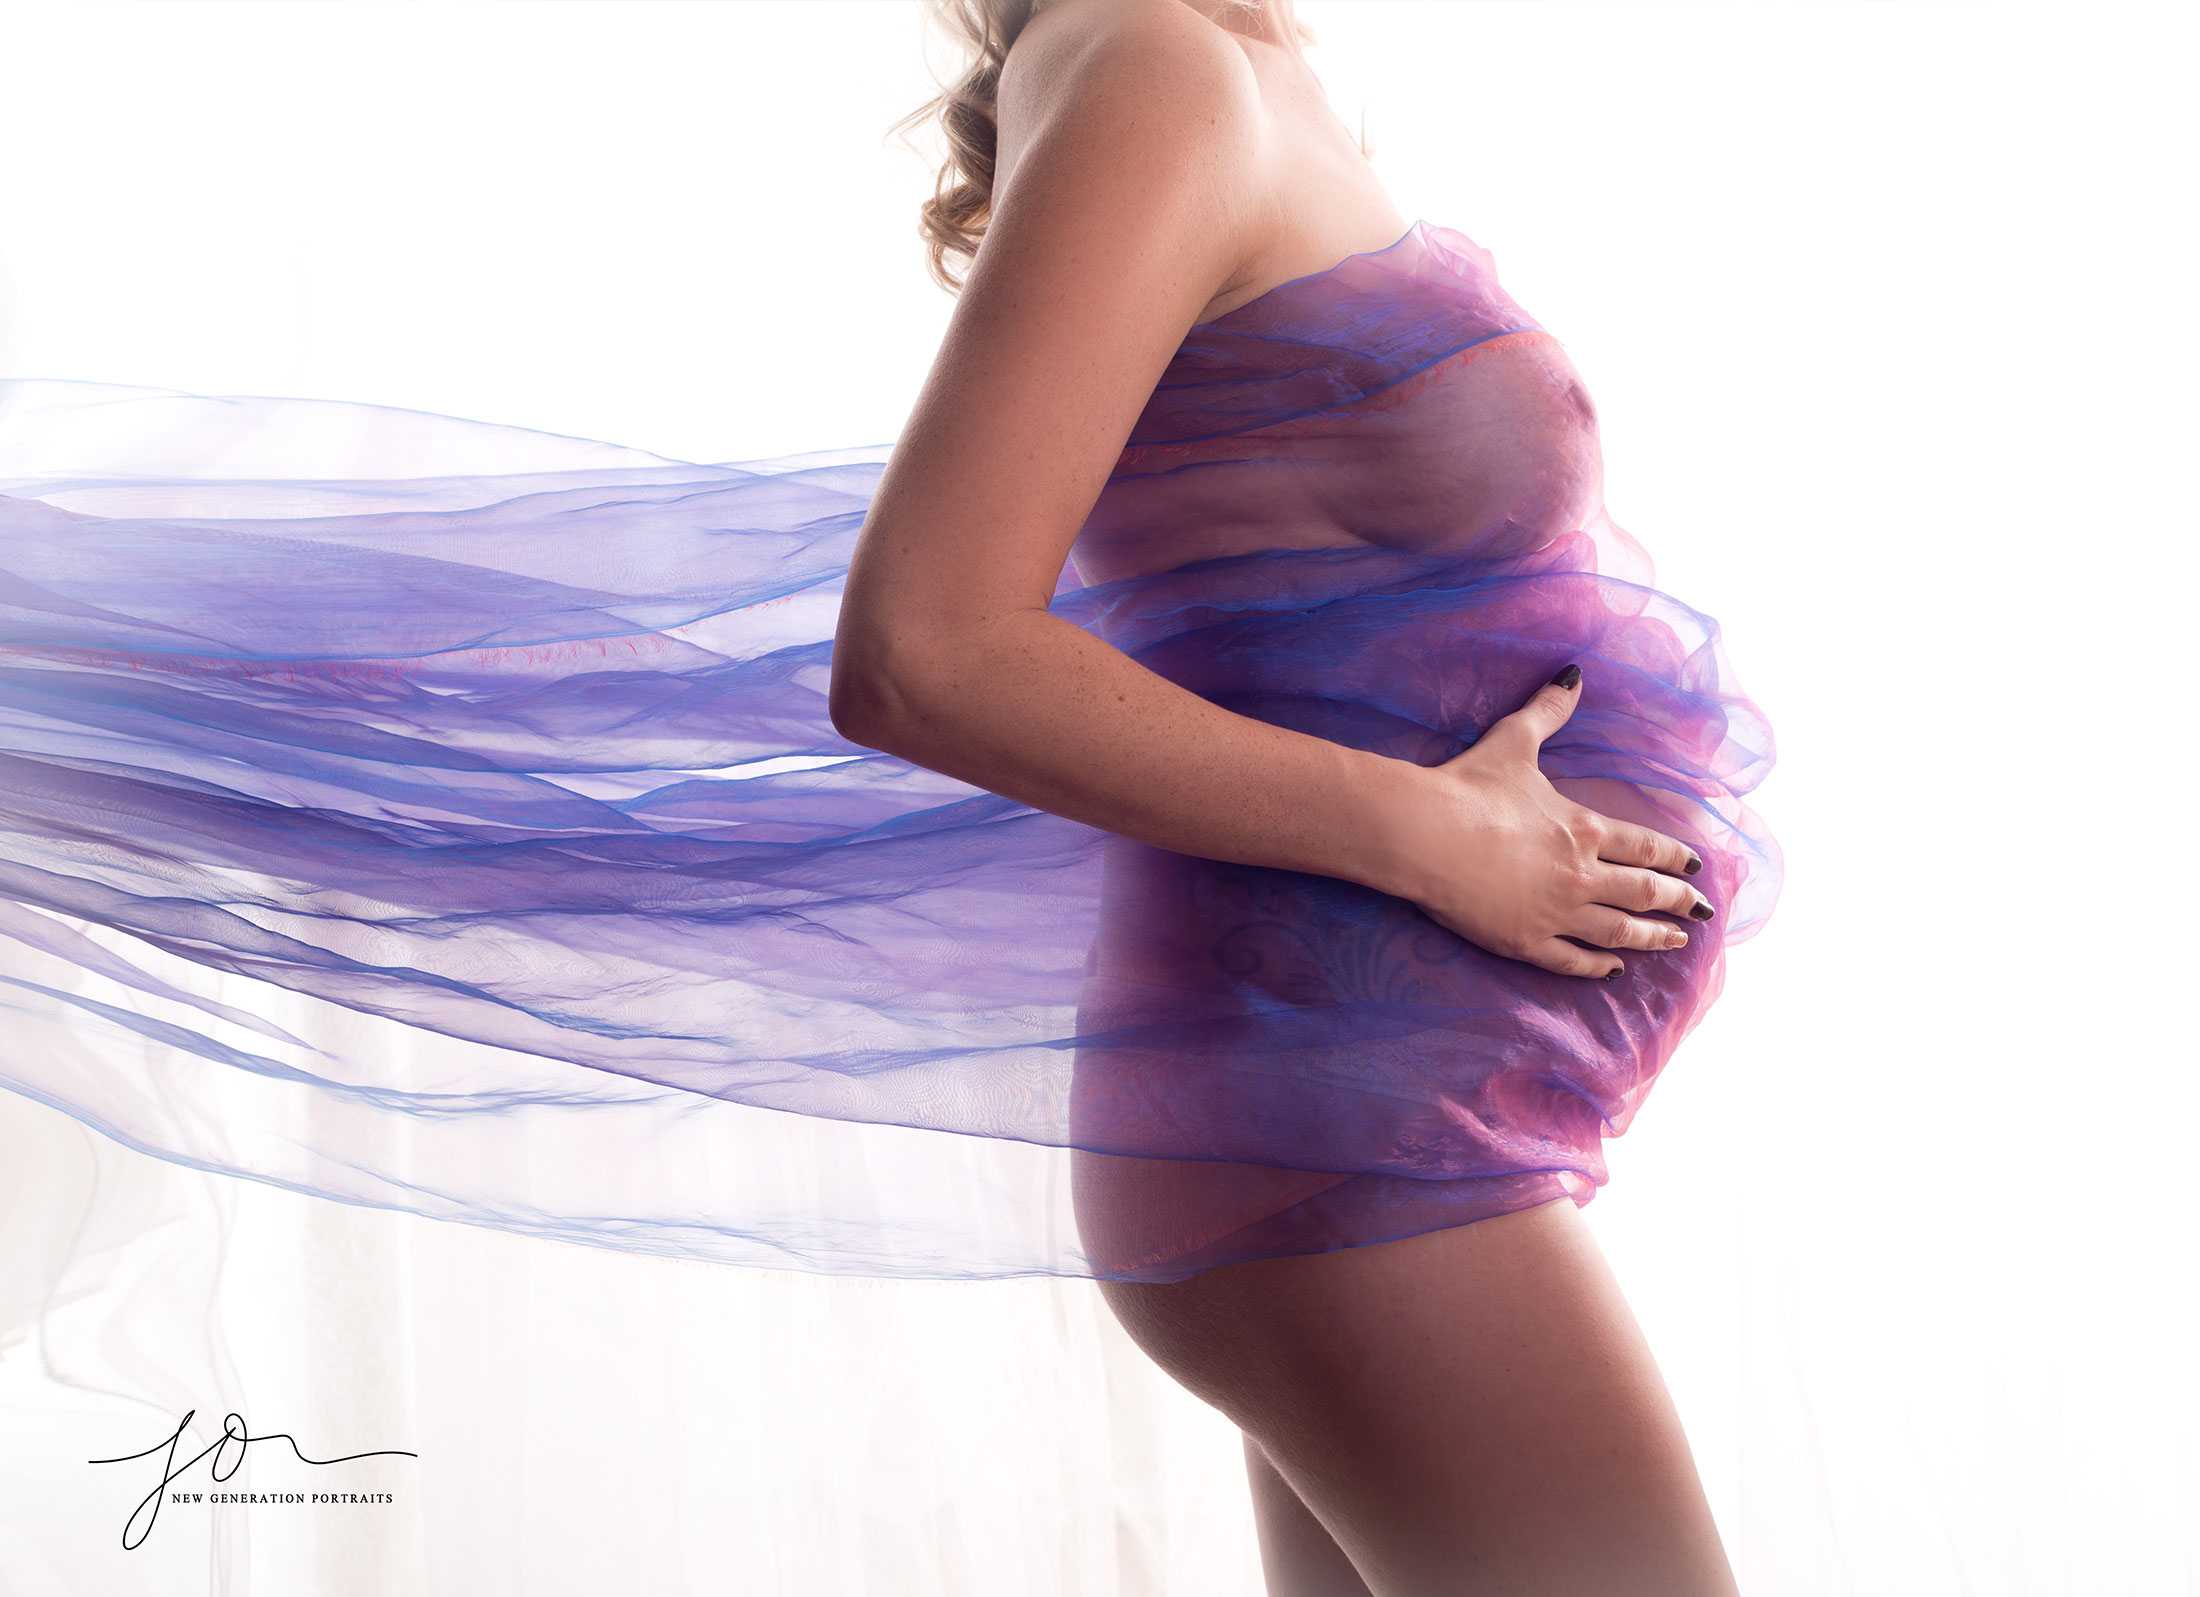 Baby bump covers by purple fabric. Captured by New Generation Portraits